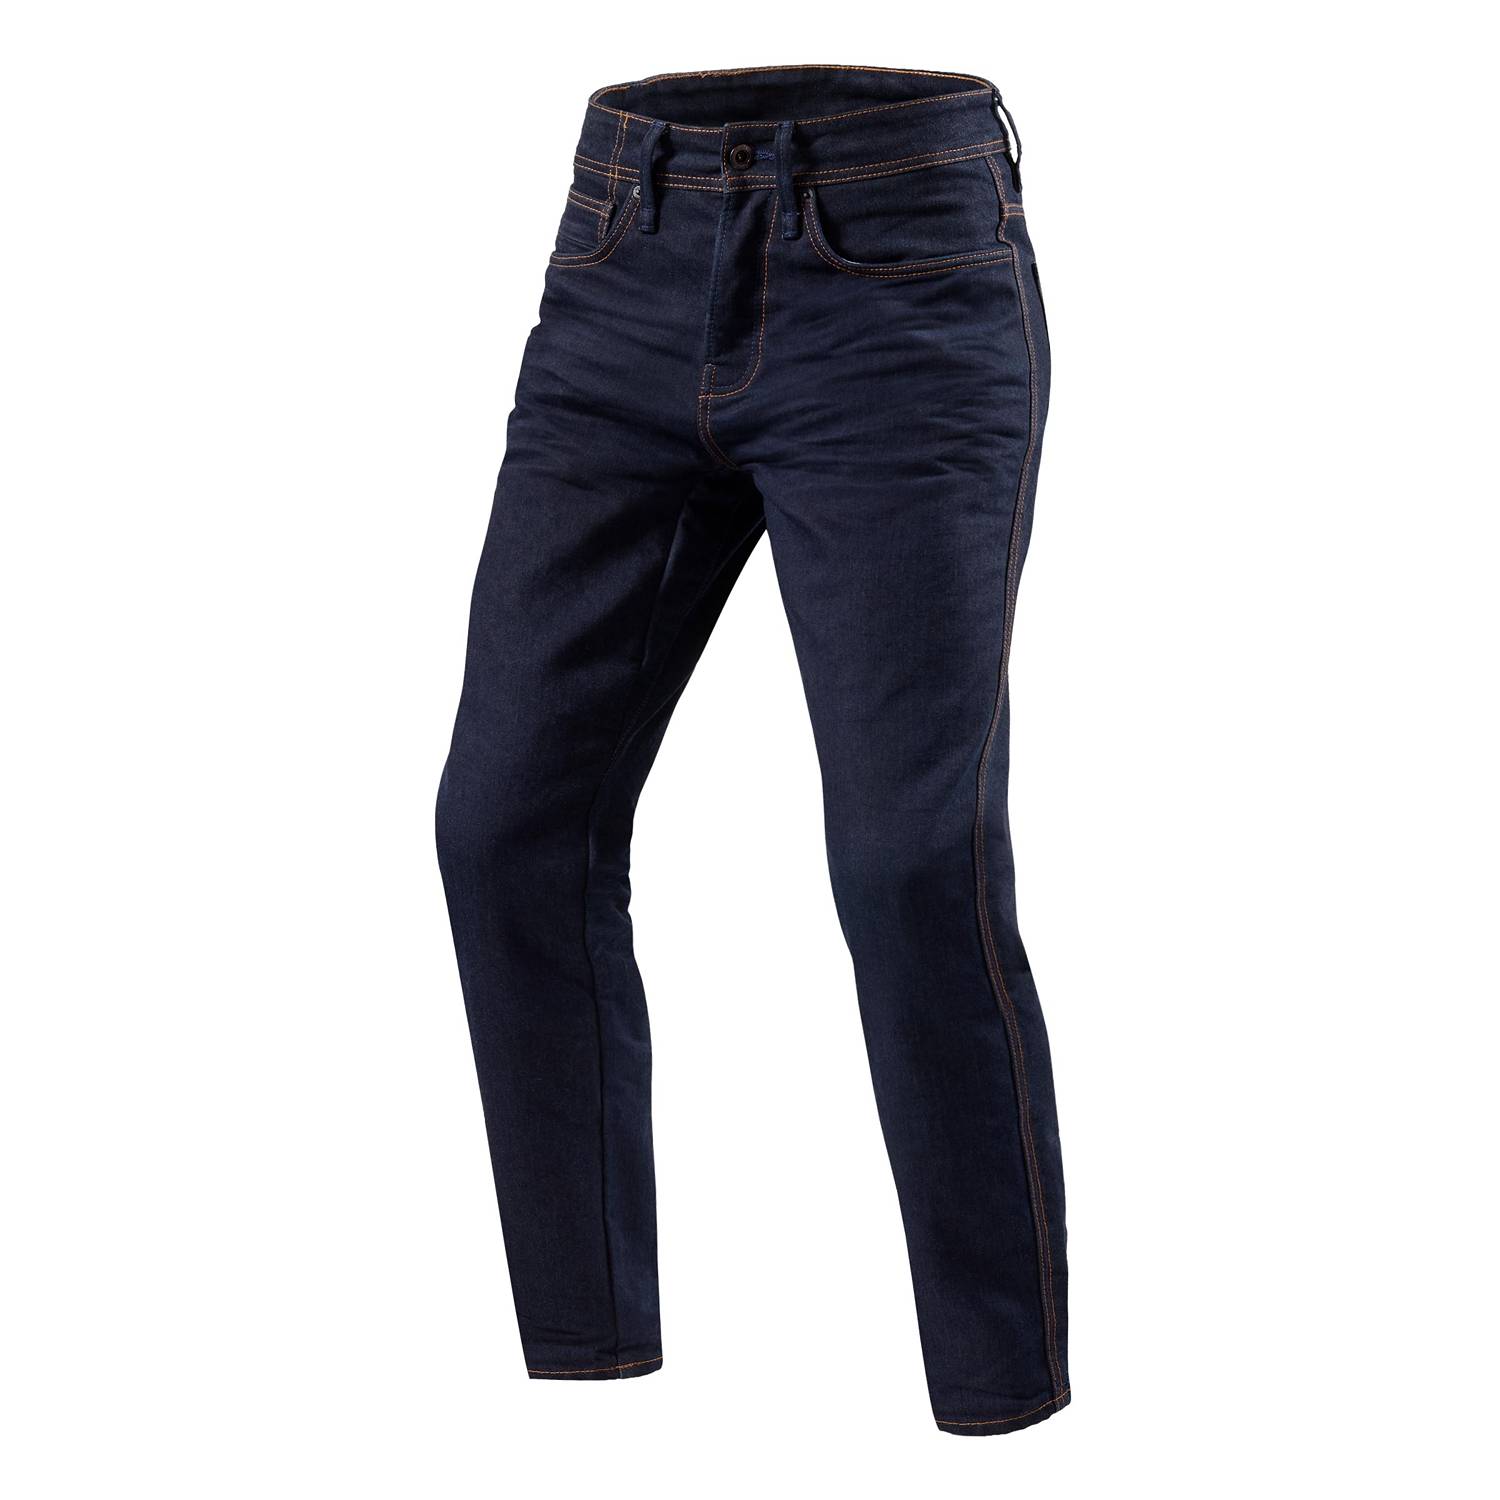 Image of REV'IT! Jeans Reed RF Dark Blue Used Motorcycle Jeans Size L36/W30 ID 8700001337069